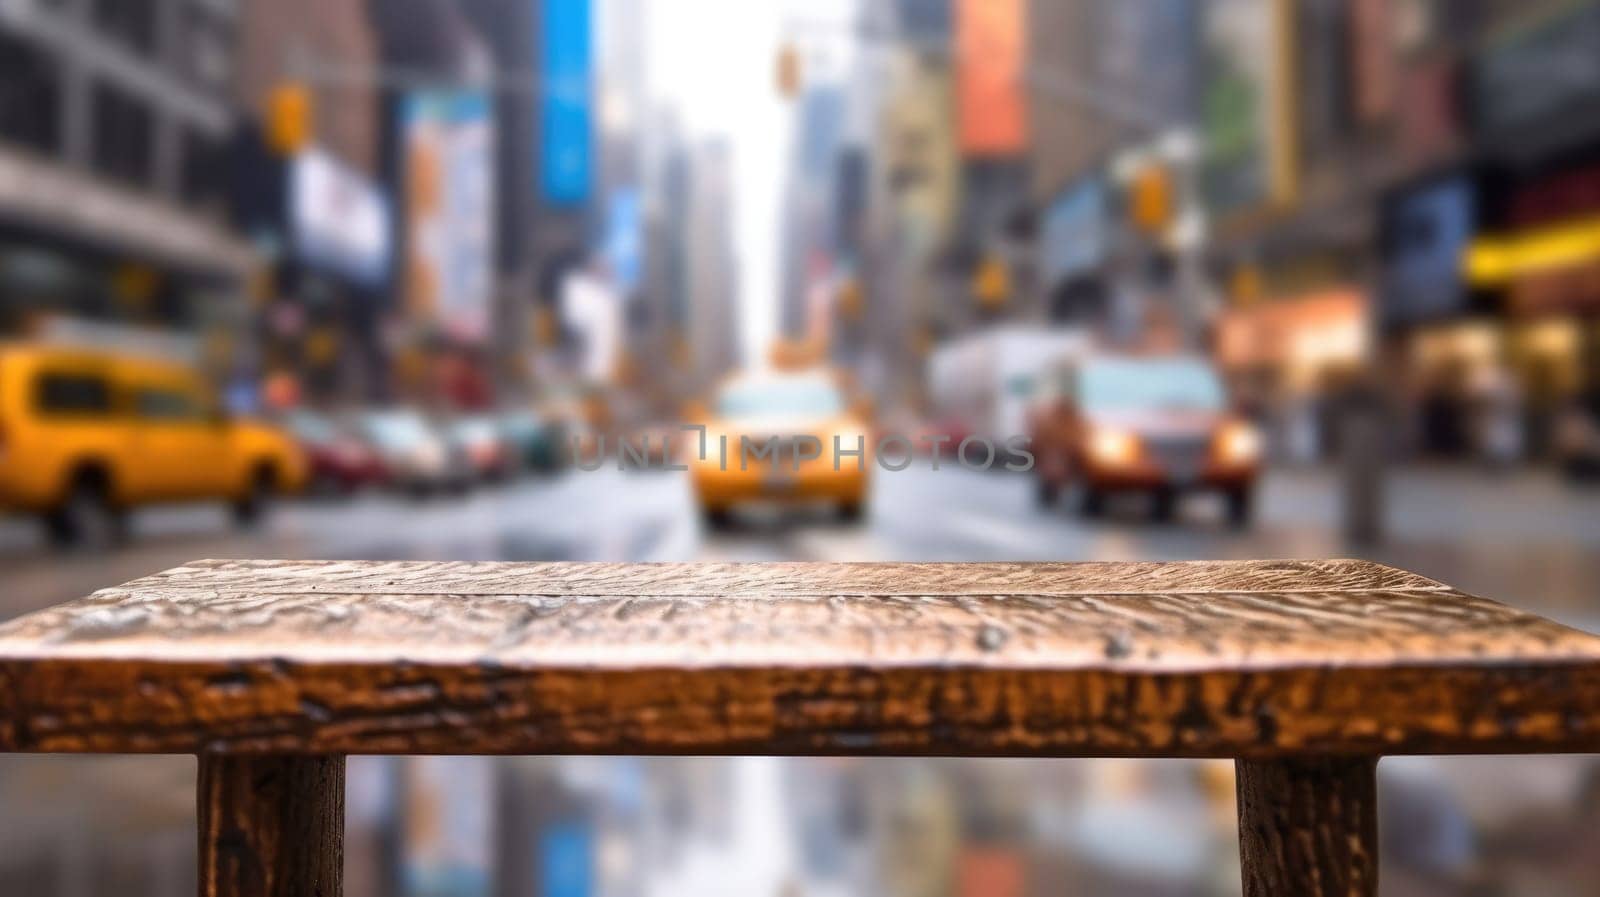 The empty wooden table top with blur background of NYC street. Exuberant. by biancoblue